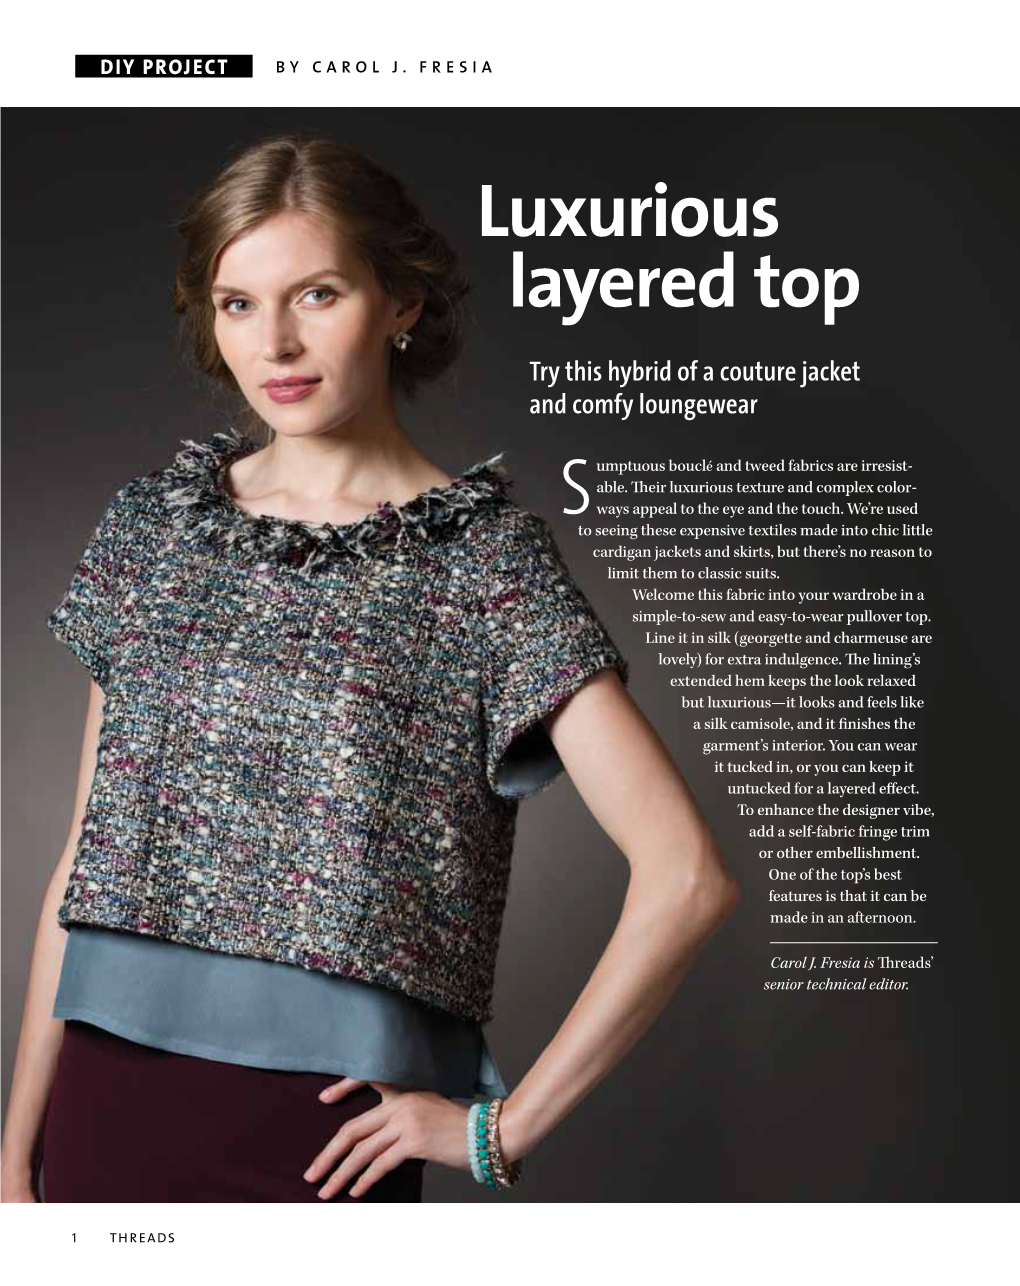 Luxurious Layered Top Try This Hybrid of a Couture Jacket and Comfy Loungewear